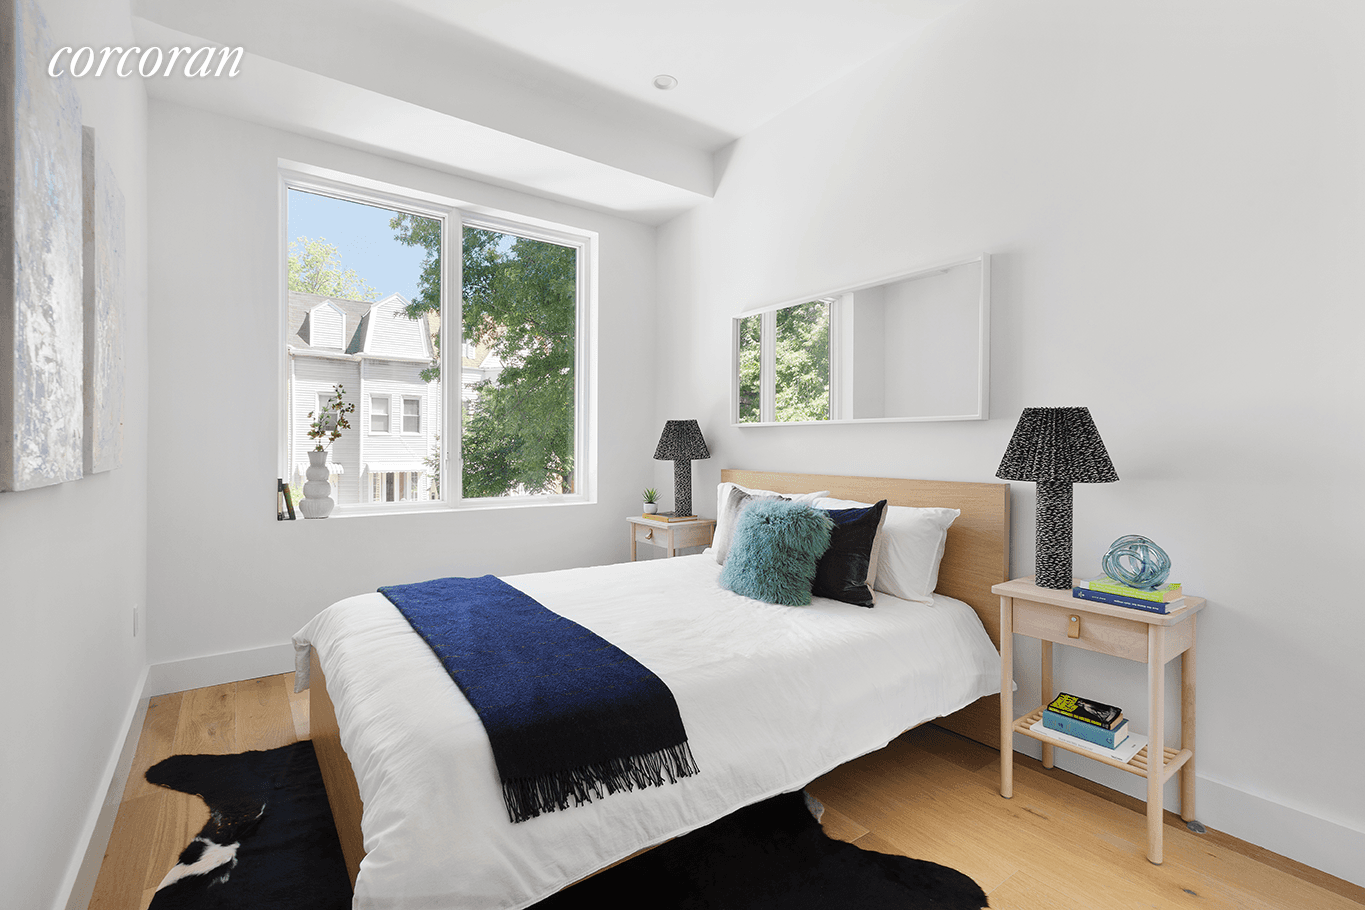 258 Winthrop Street is a newly constructed 8 unit boutique condominium in Prospect Lefferts Gardens, nestled on a beautiful tree lined street and just three blocks from Prospect Park.